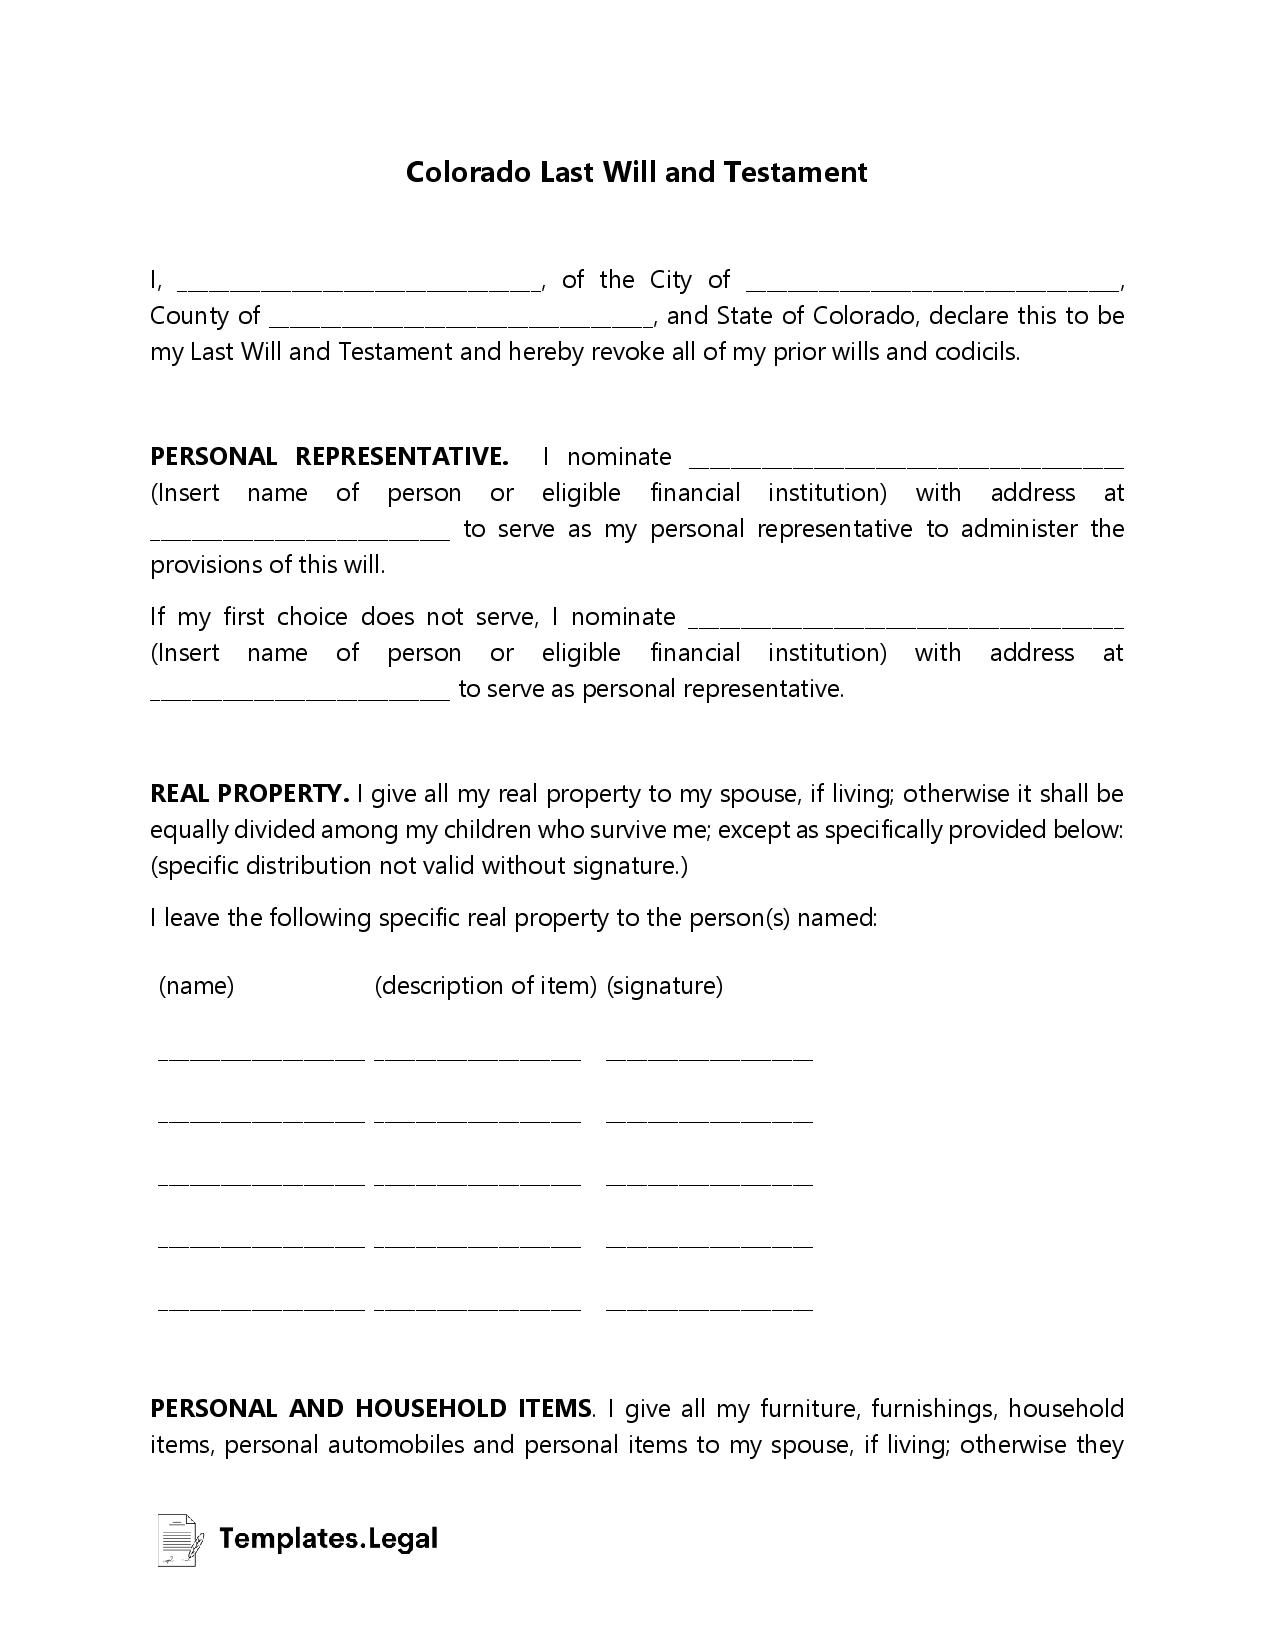 Colorado Last Will and Testament Templates Free Word PDF ODT 